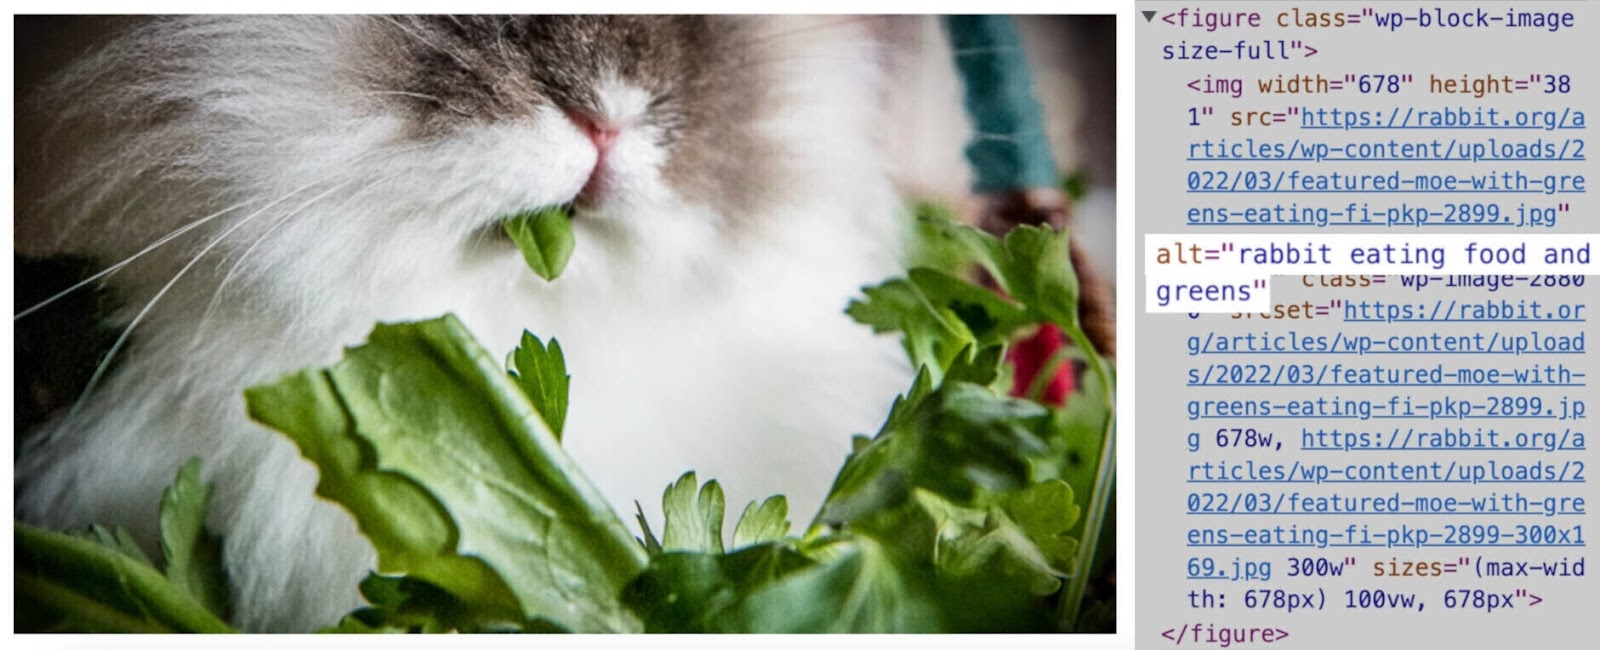 An image with alt text "rabbit eating food and greens"